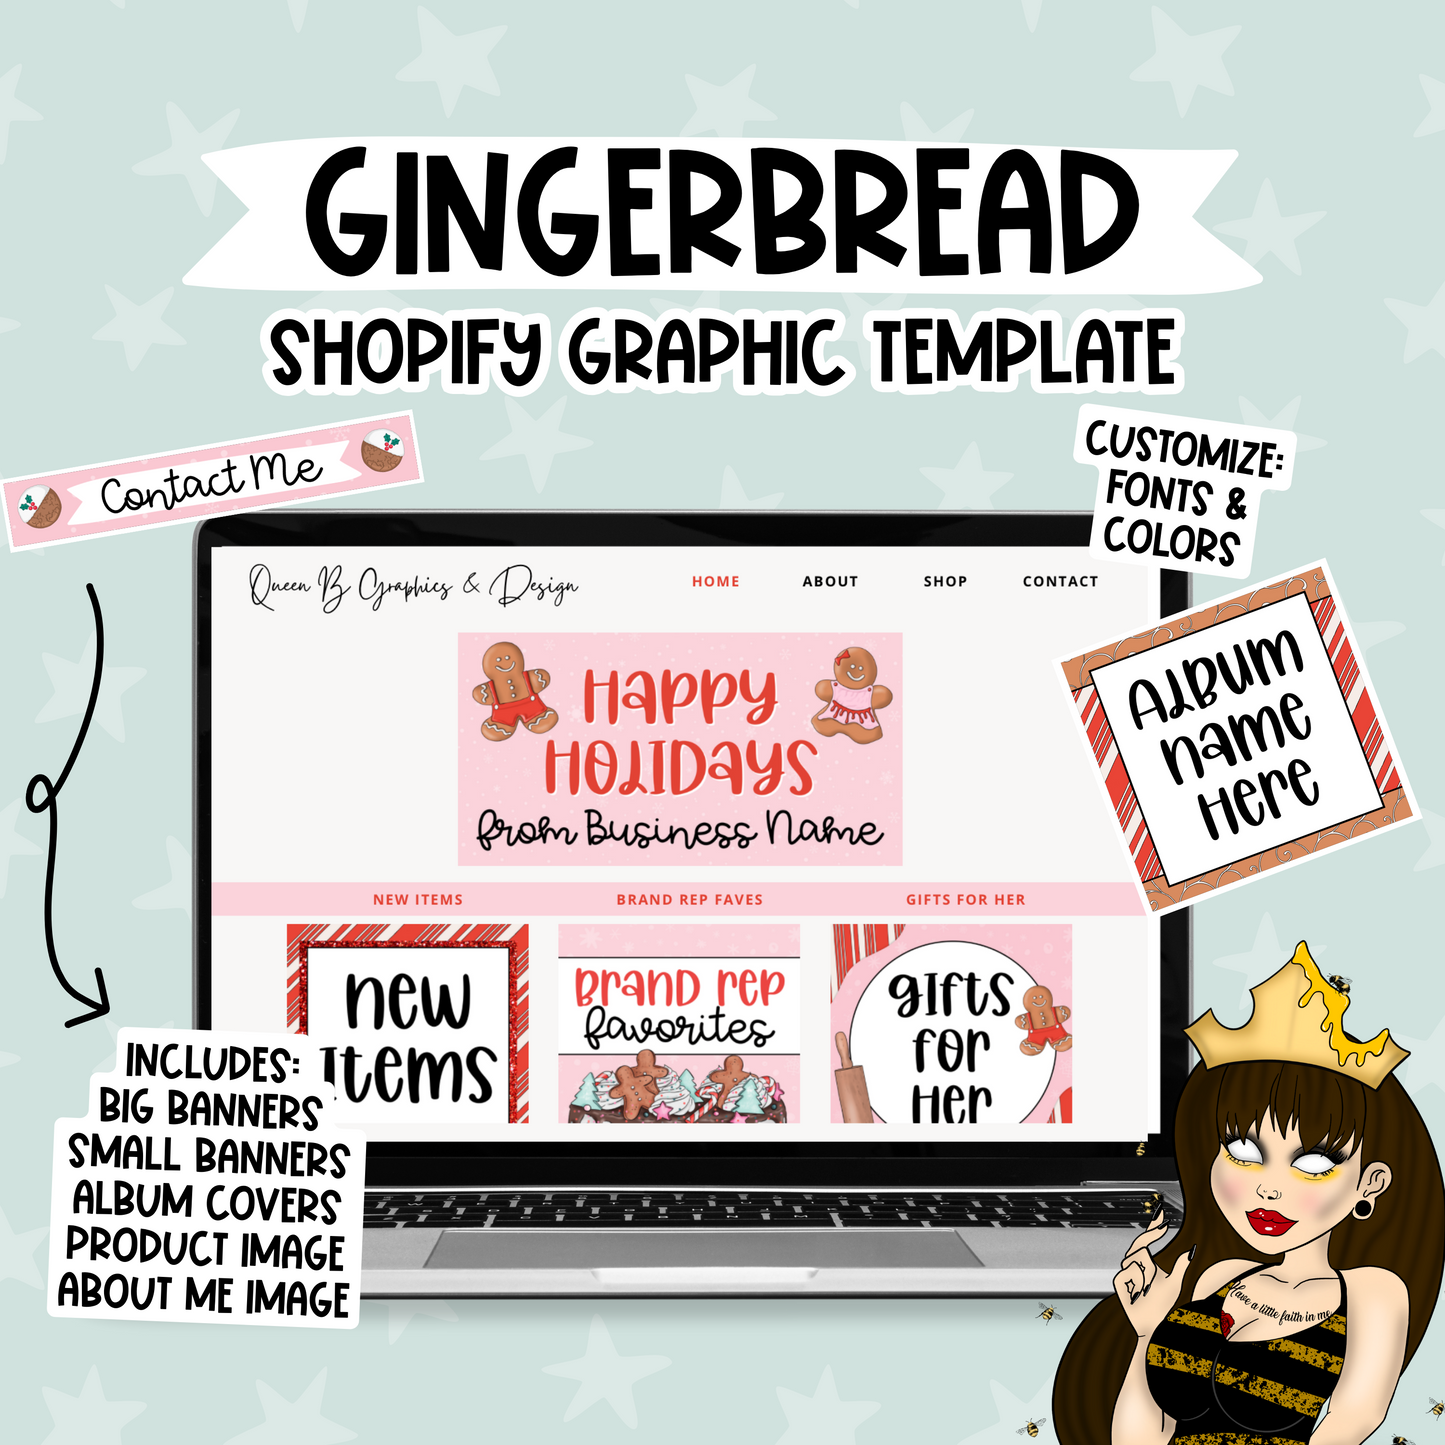 Gingerbread Shopify Graphic Templates